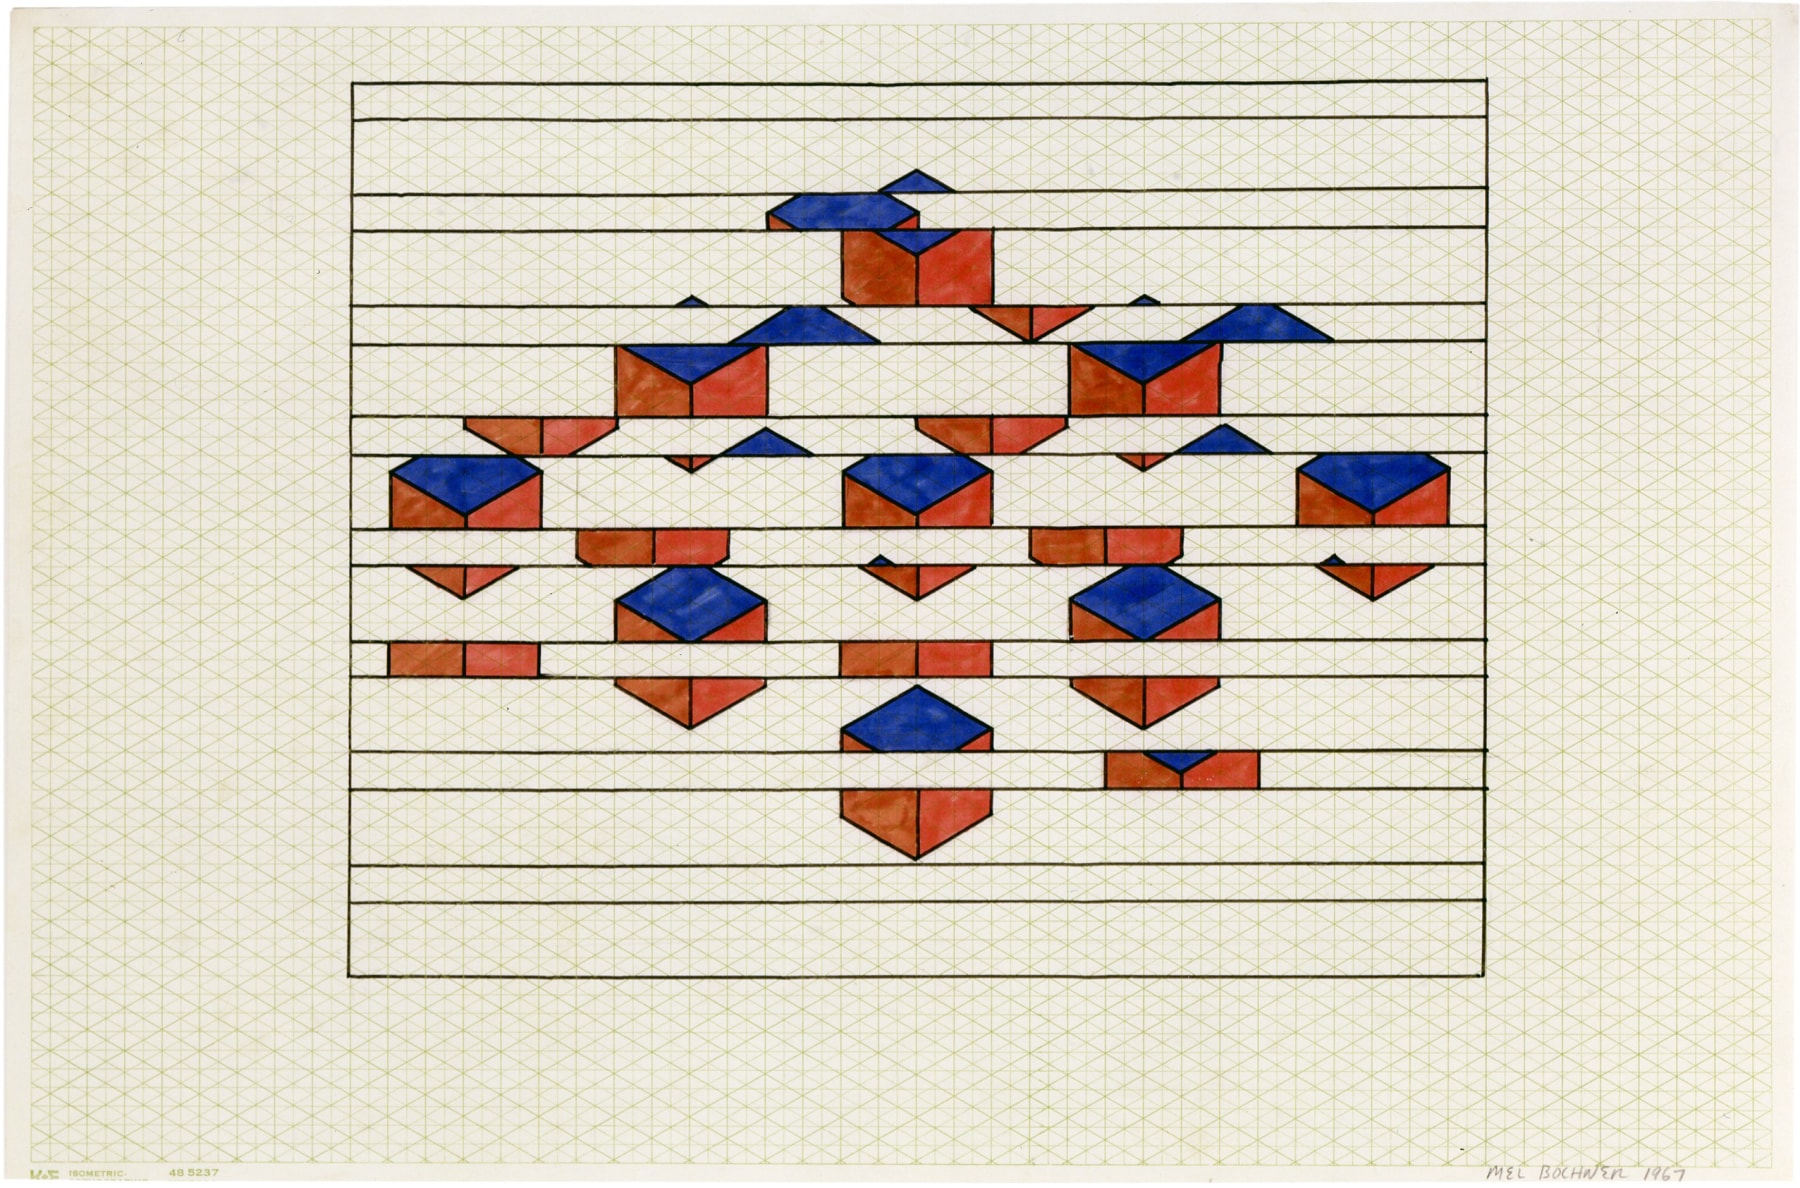 Mel Bochner,&nbsp;Constants and Variables: Horizontal Striations, 1967. Ink, felt tip pen, and pencil on graph paper, 13 x 19 inches.